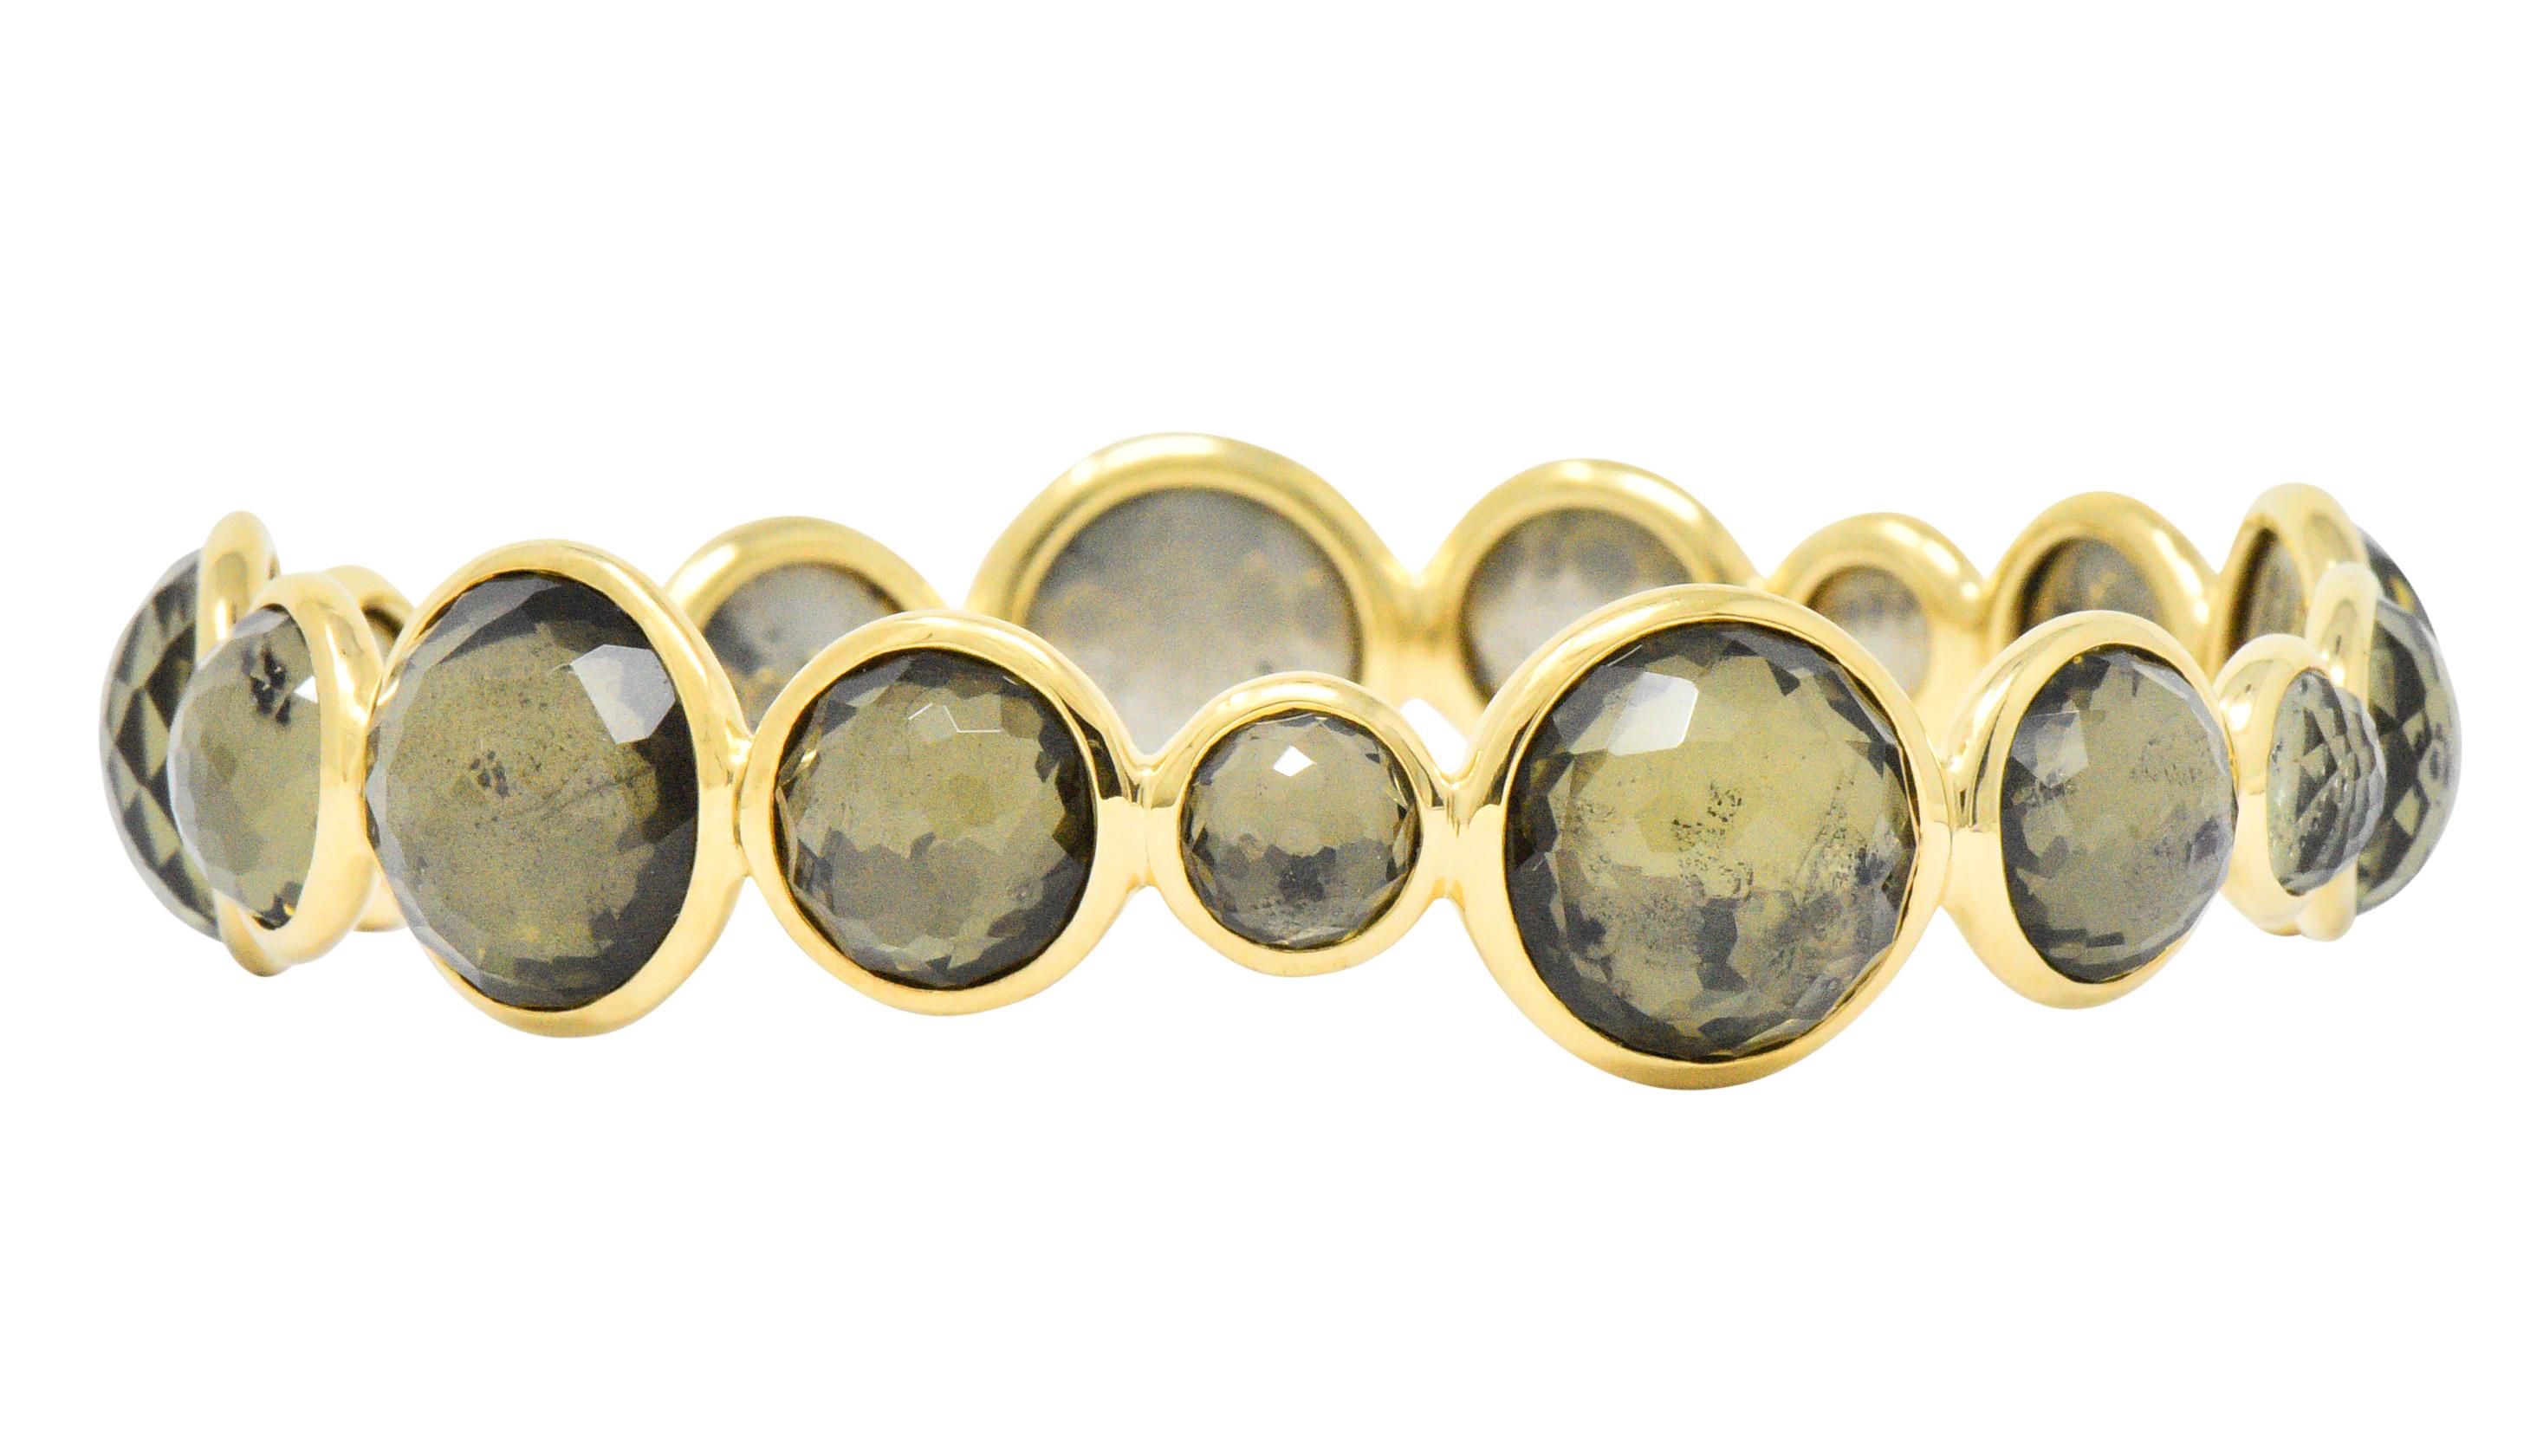  Bangle style bracelet set all the way around with round checkerboard citrine of various sizes, measuring approximately 7.0 to 13.0 mm

The citrine are bezel set and backed with pyrite

From the Lollipop collection 

Singed Ippolita for Ippolita